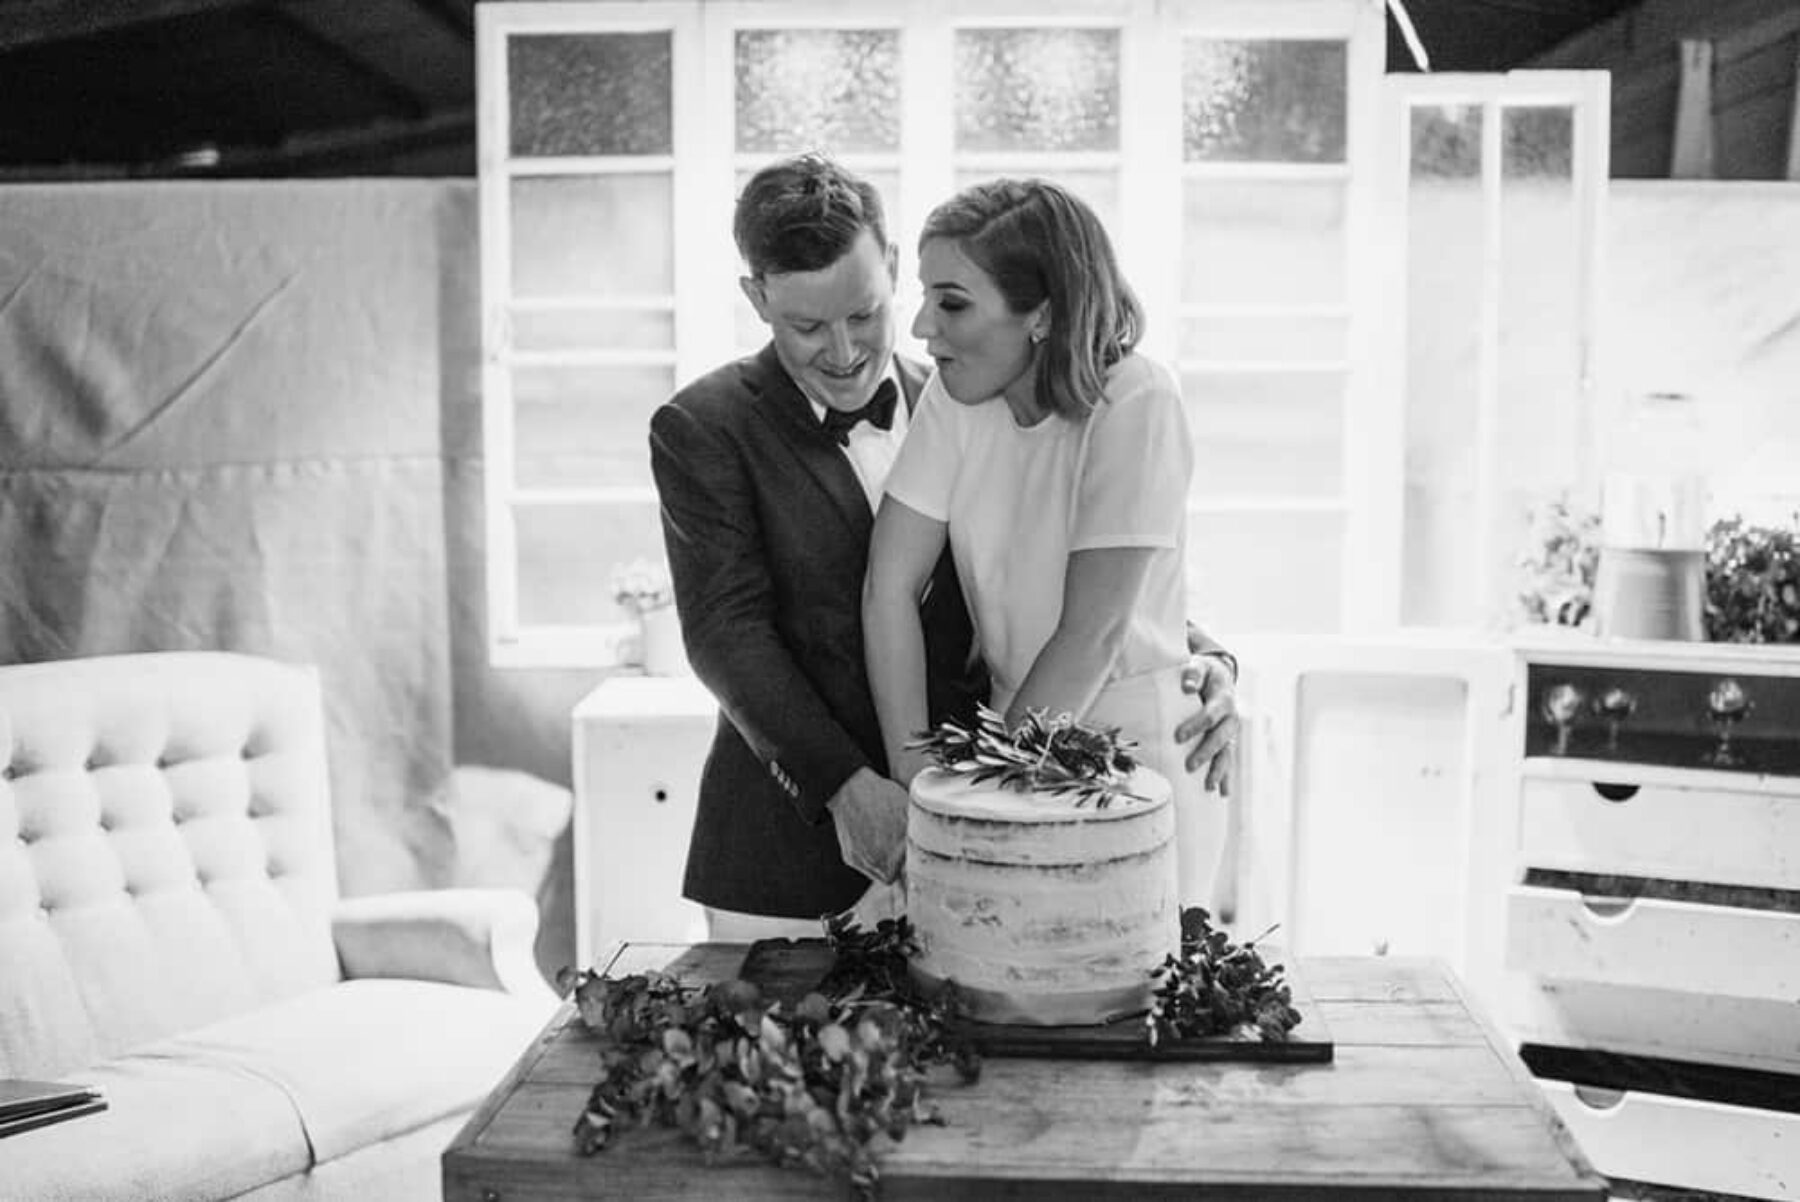 relaxed DIY country wedding - photography by Todd Hunter McGaw